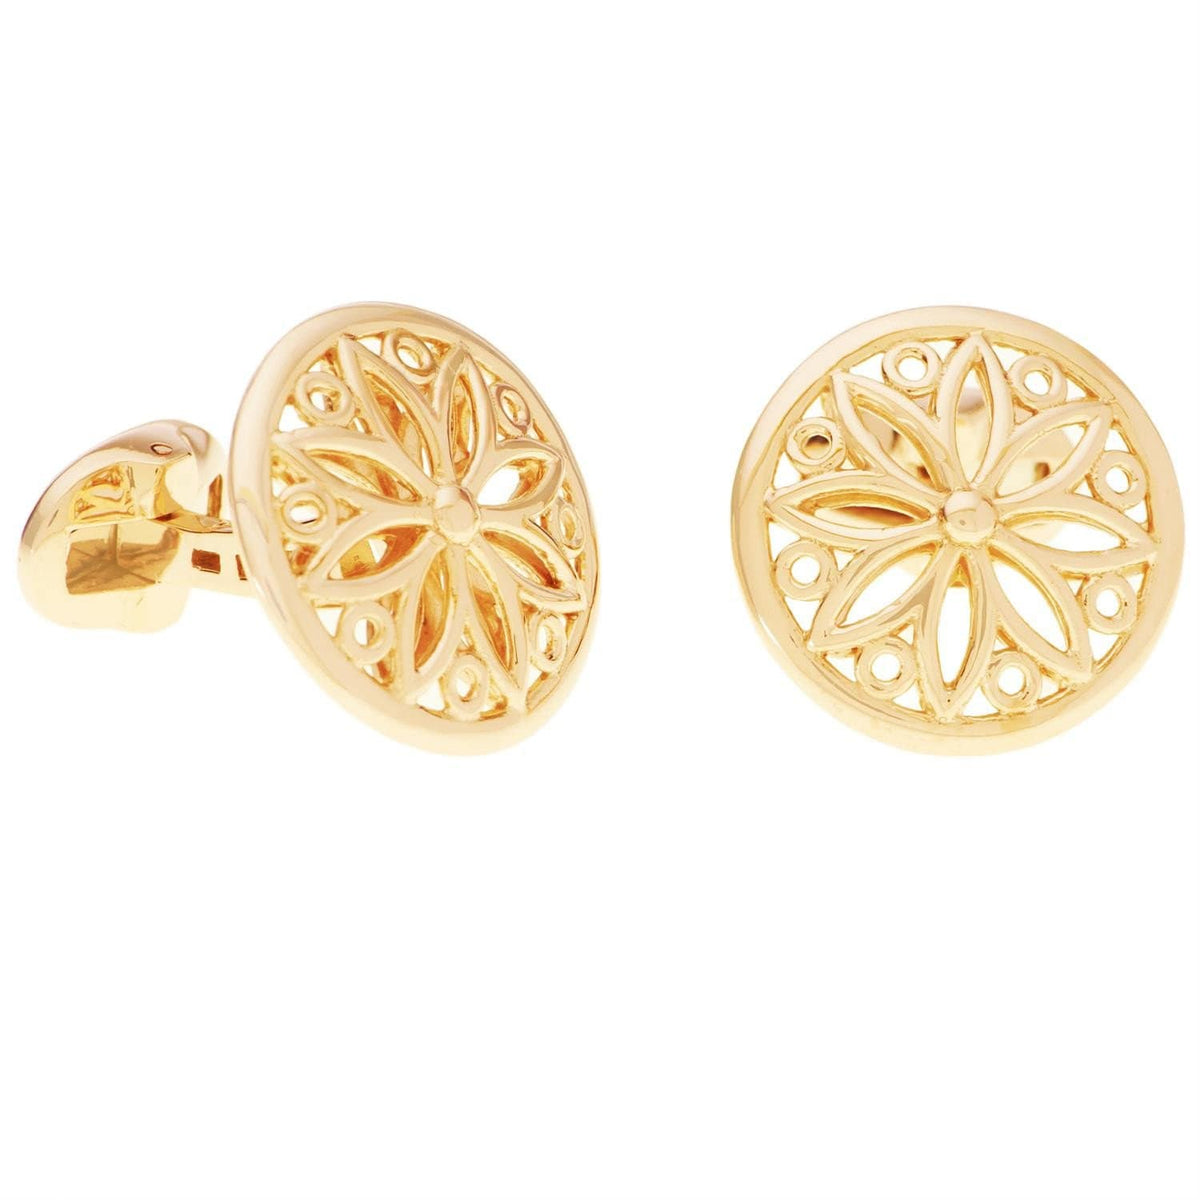 GOLD CUFFLINKS - Chris Aire Fine Jewelry & Timepieces